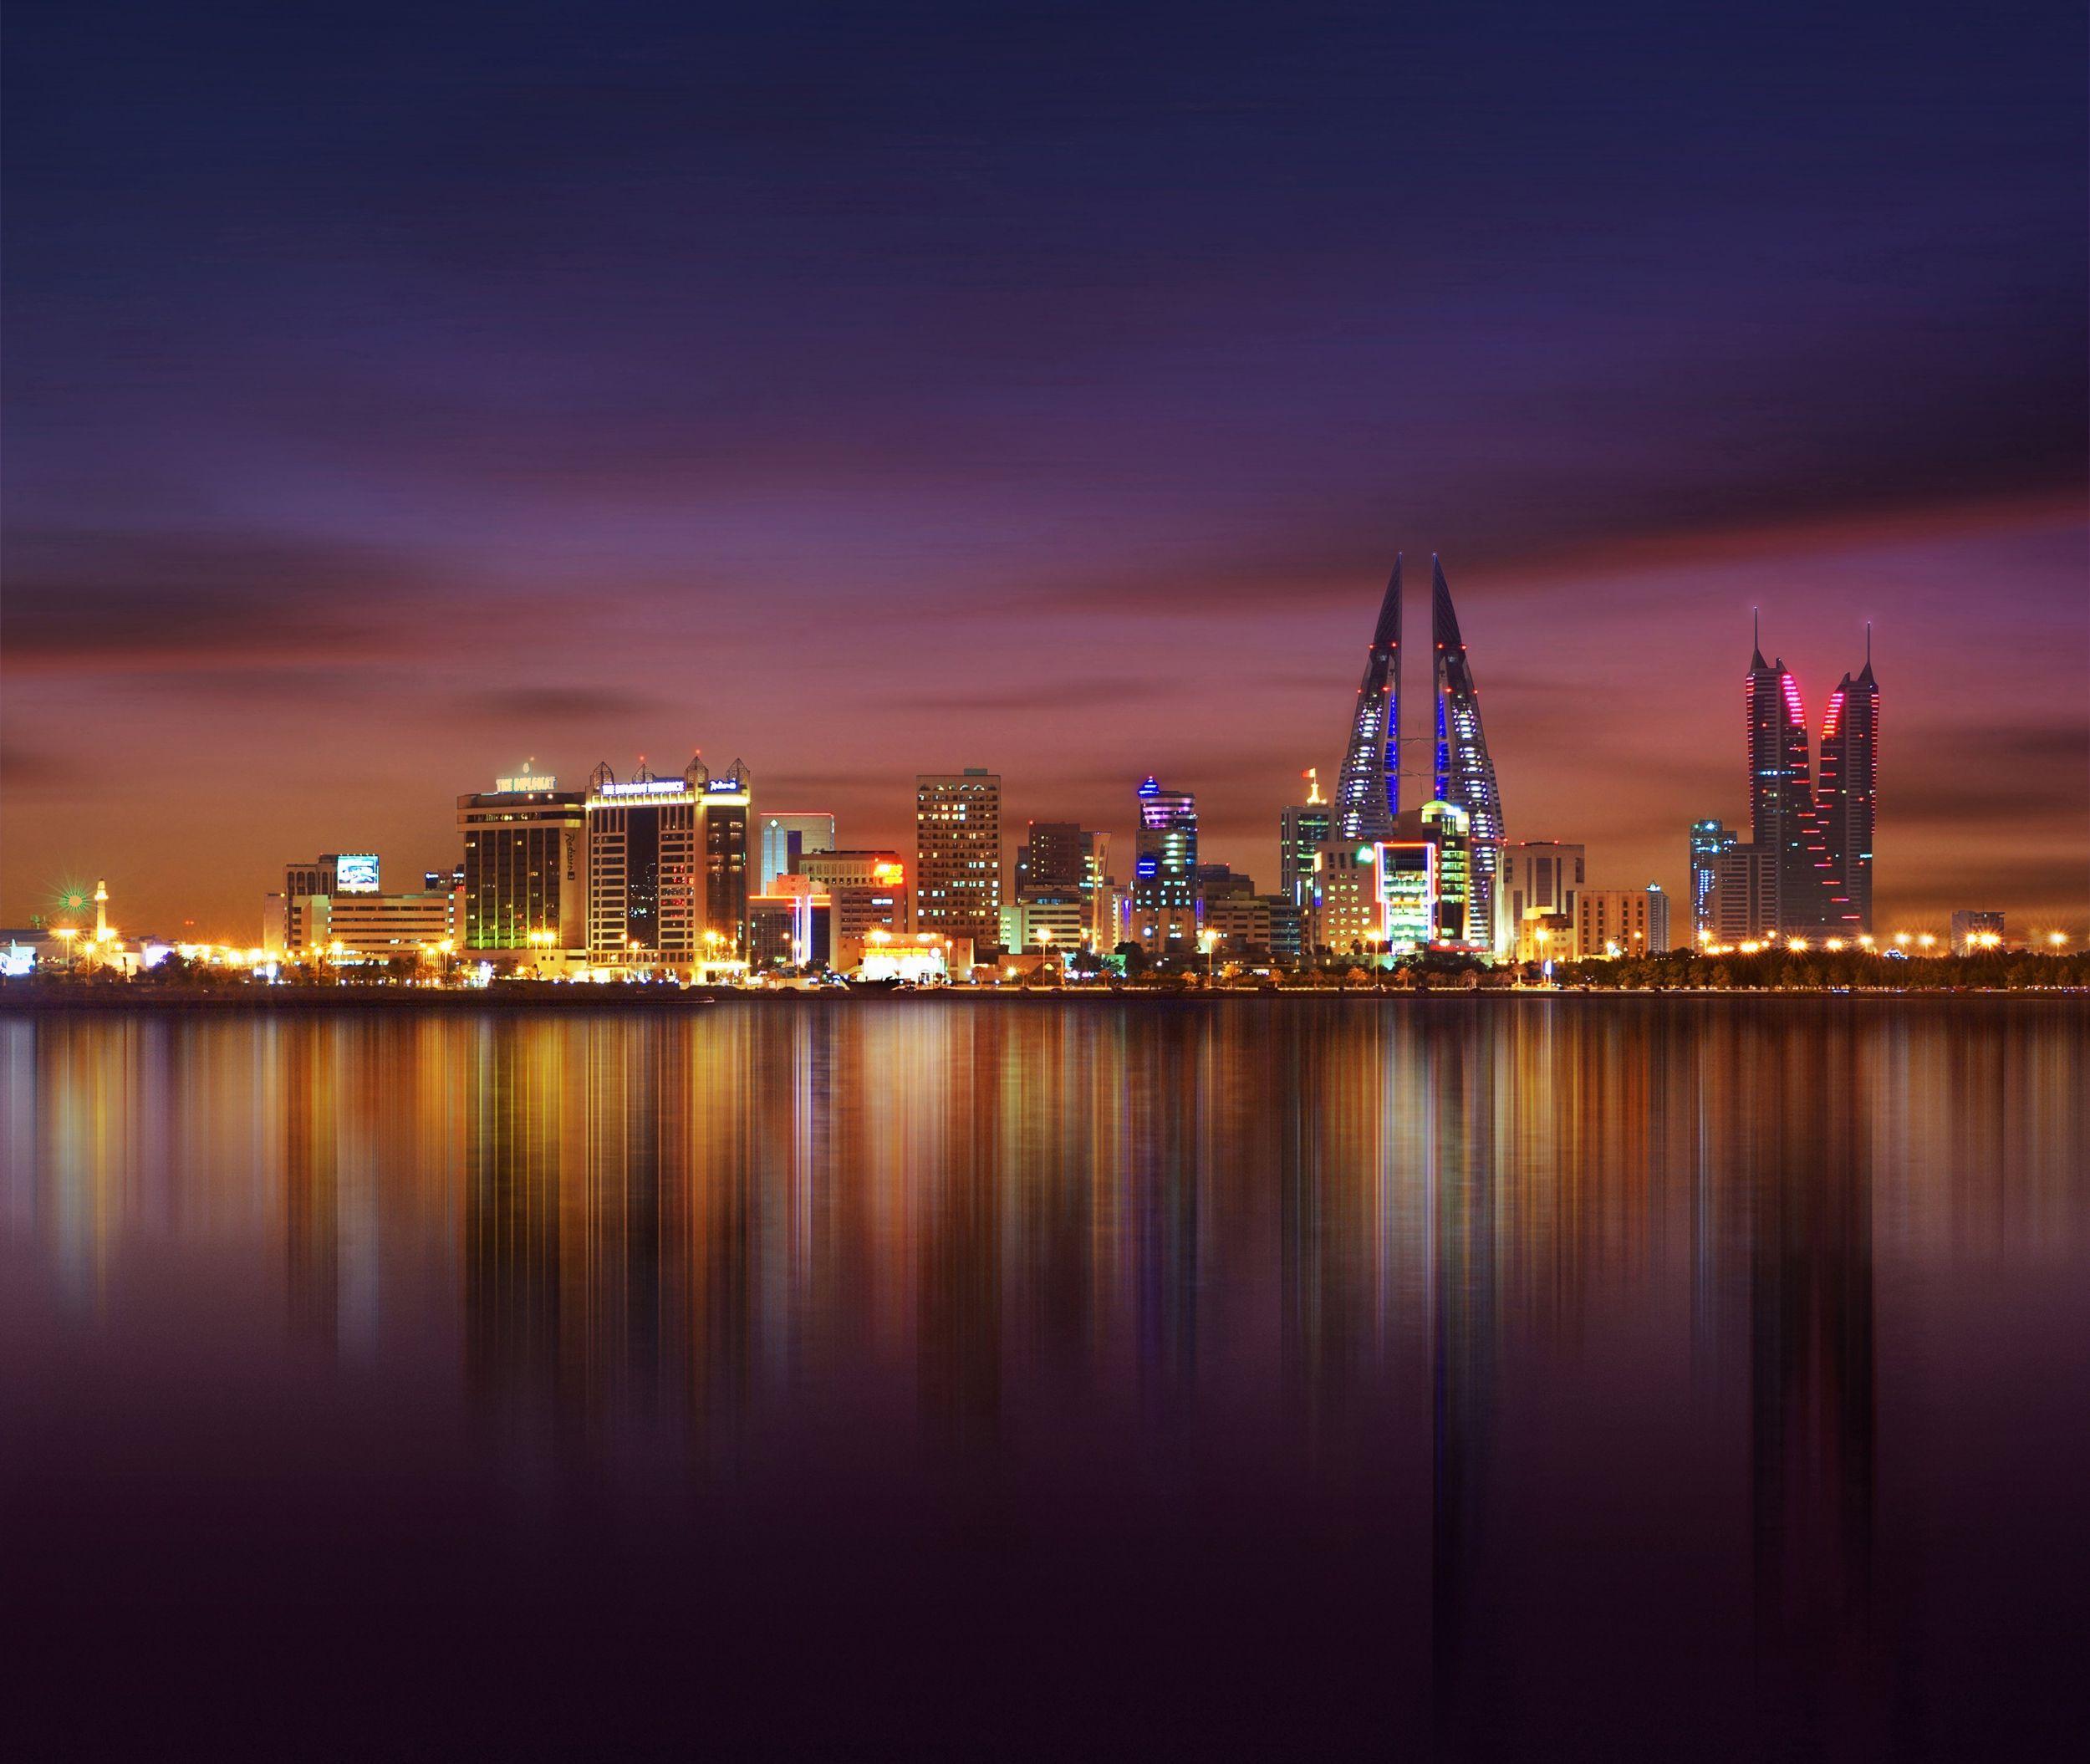 New Bahrain Wallpaper and Picture Graphics download for free